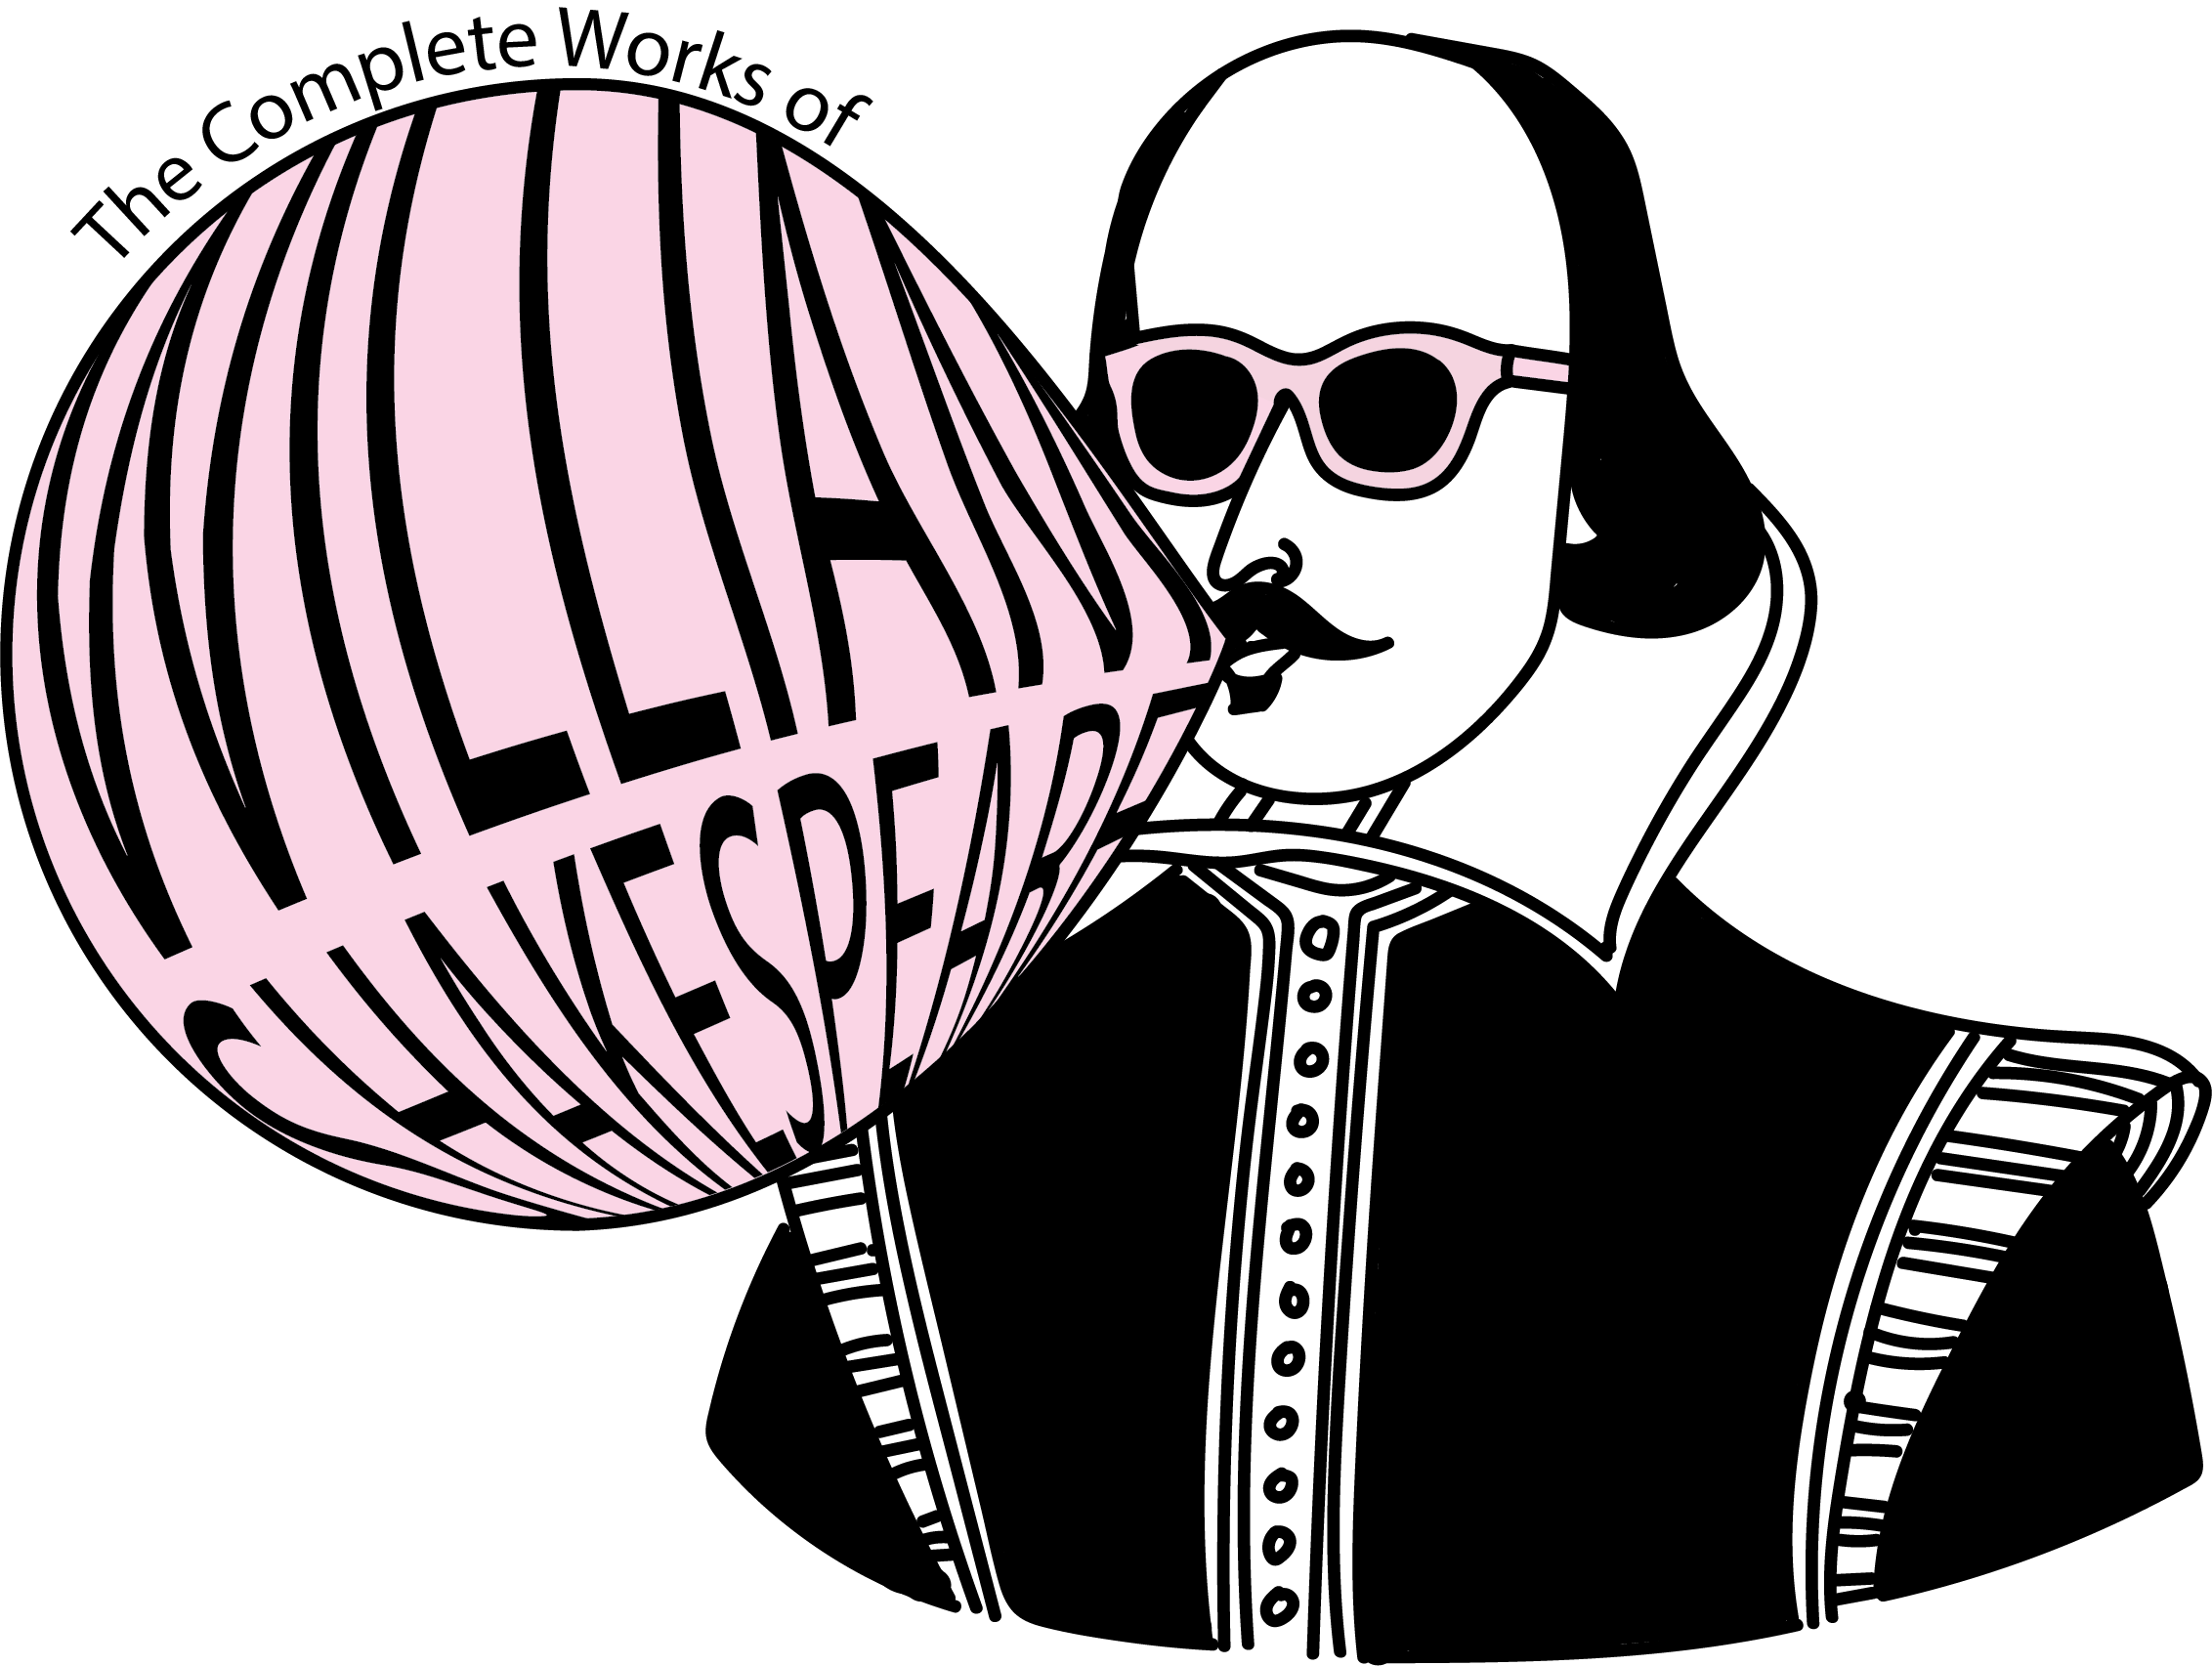 The Complete Works of William Shakespeare 2023 logo